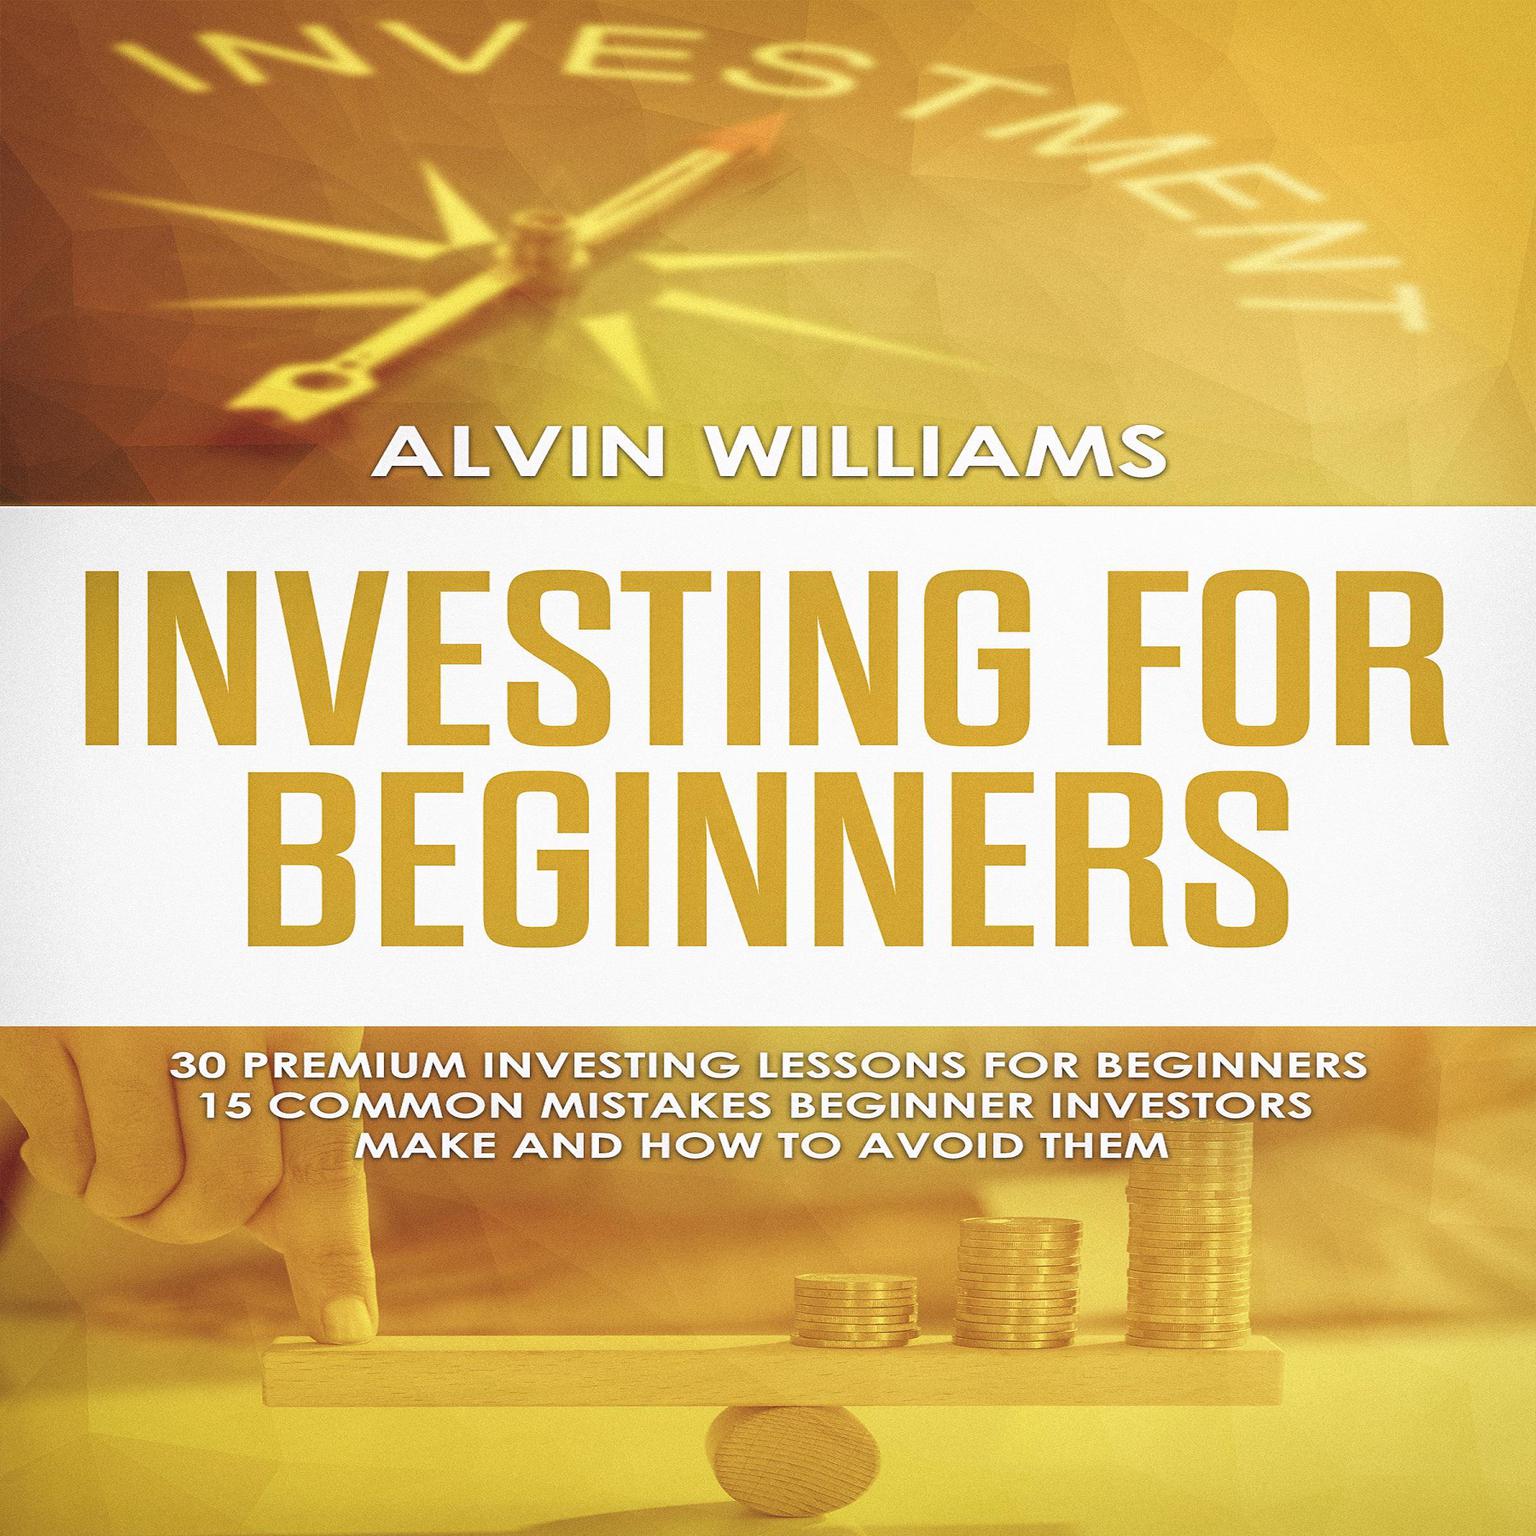 Investing for Beginners: 30 Premium Investing Lessons for Beginners + 15 Common Mistakes Beginner Investors Make and How to Avoid Them (Abridged) Audiobook, by Alvin Williams